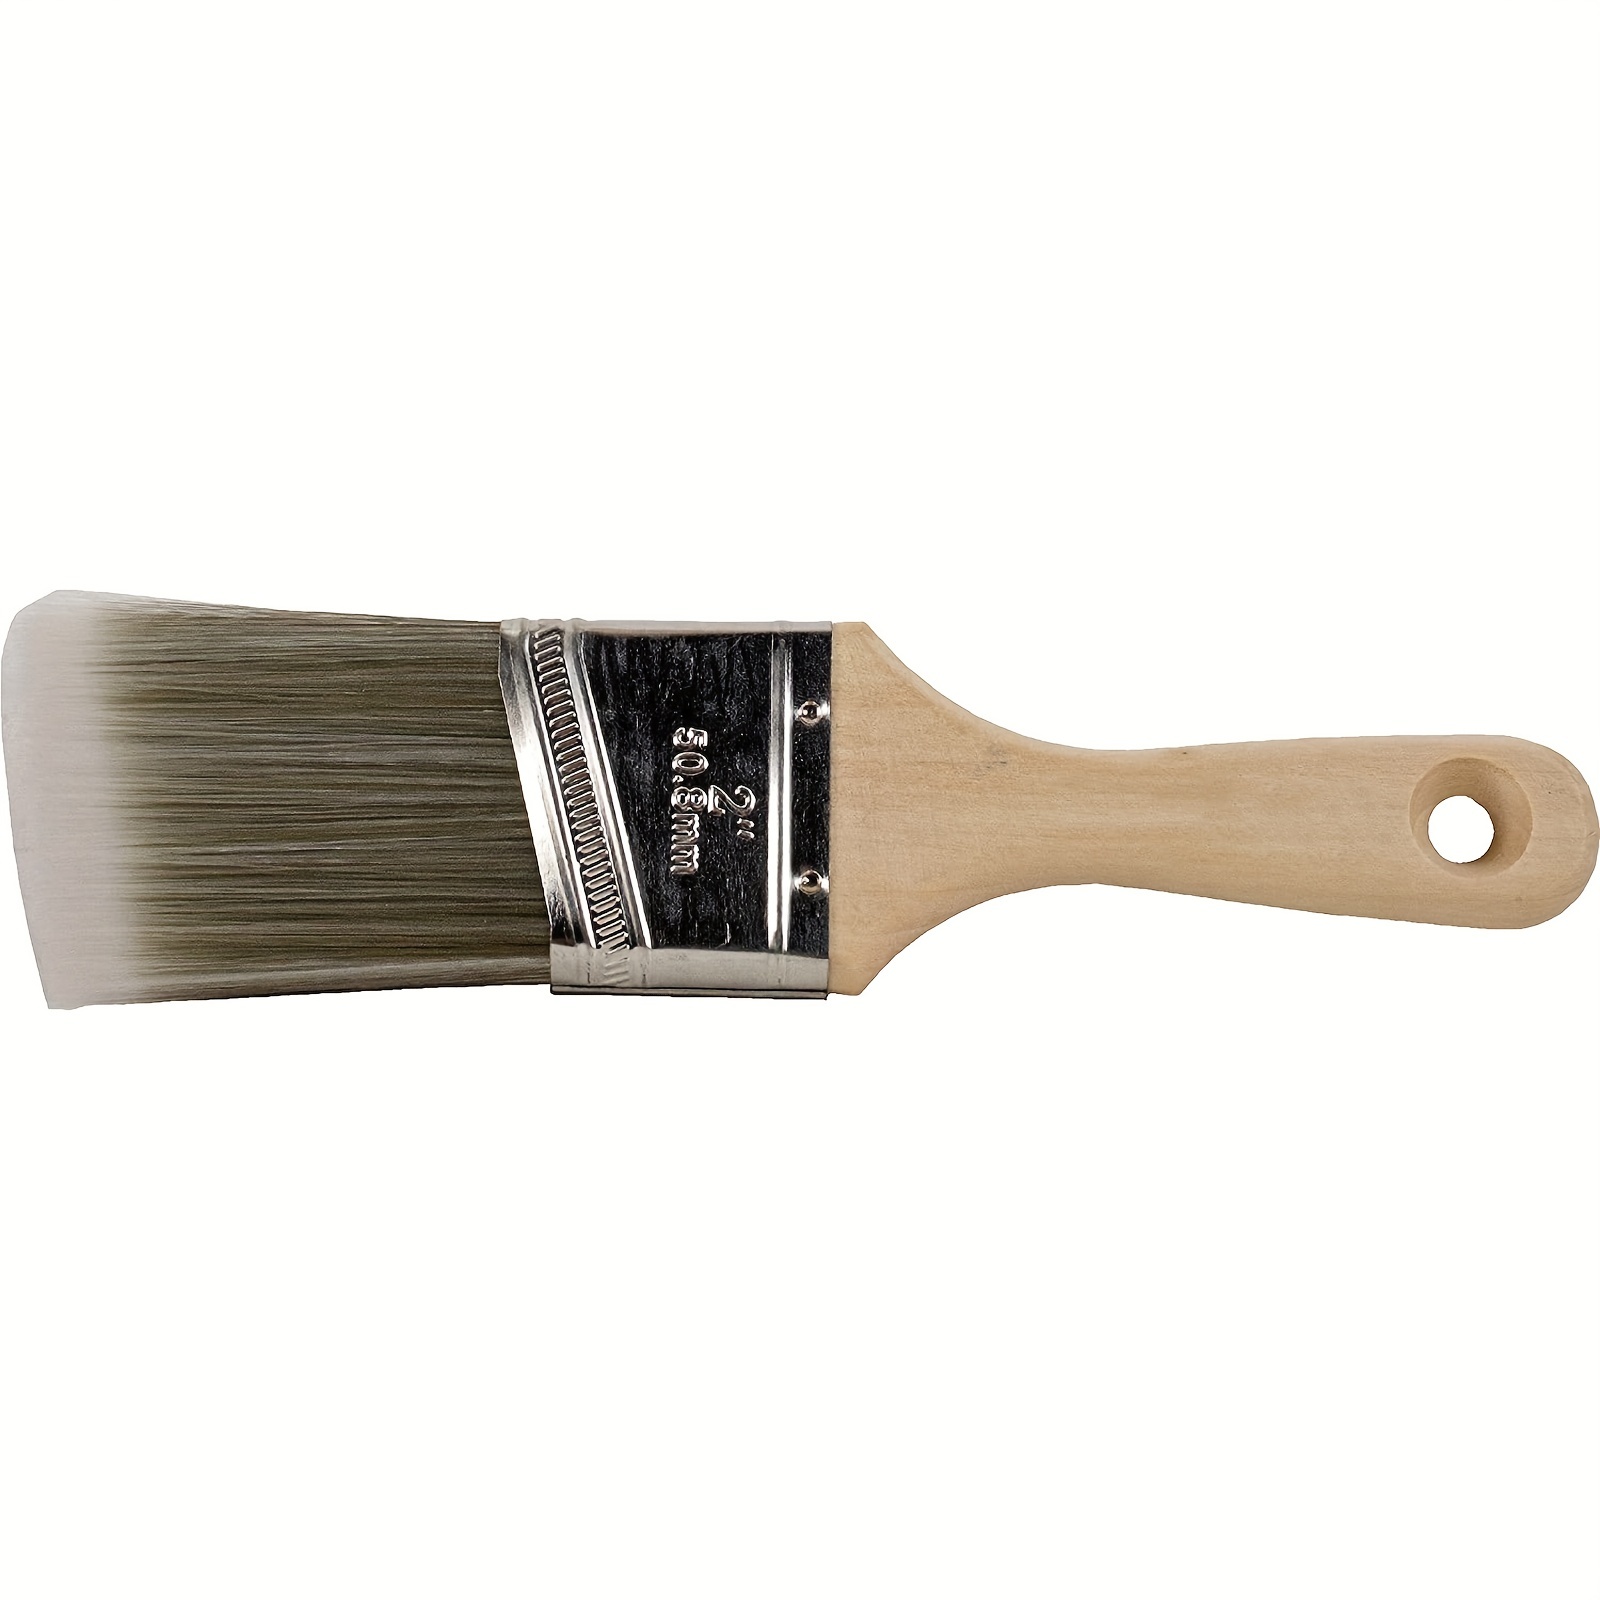 2-1/2 in. Flat Paint Brush, GOOD Quality